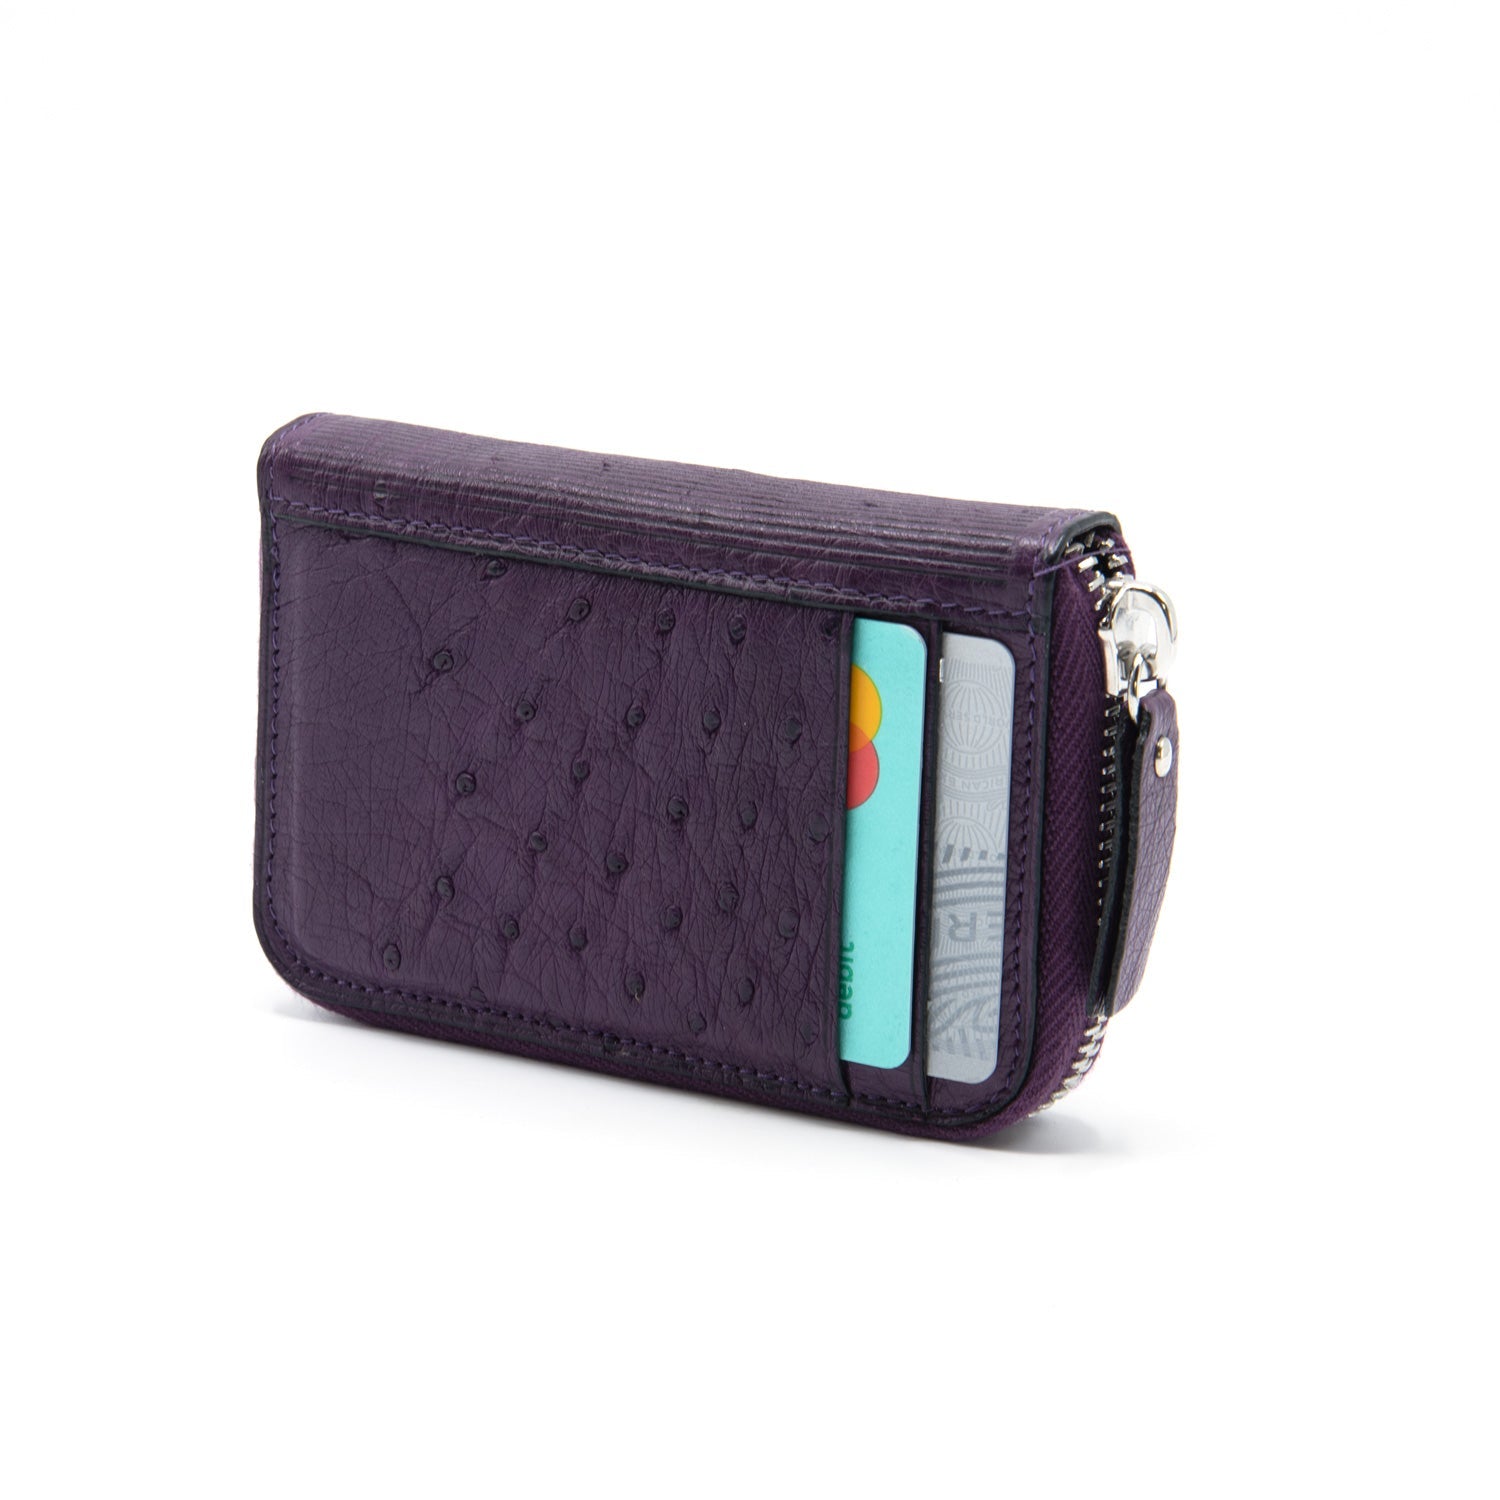 New Rae Dunn black pebbled leather flap close purse BE KIND multi-colo –  You're Never Quite Dunn